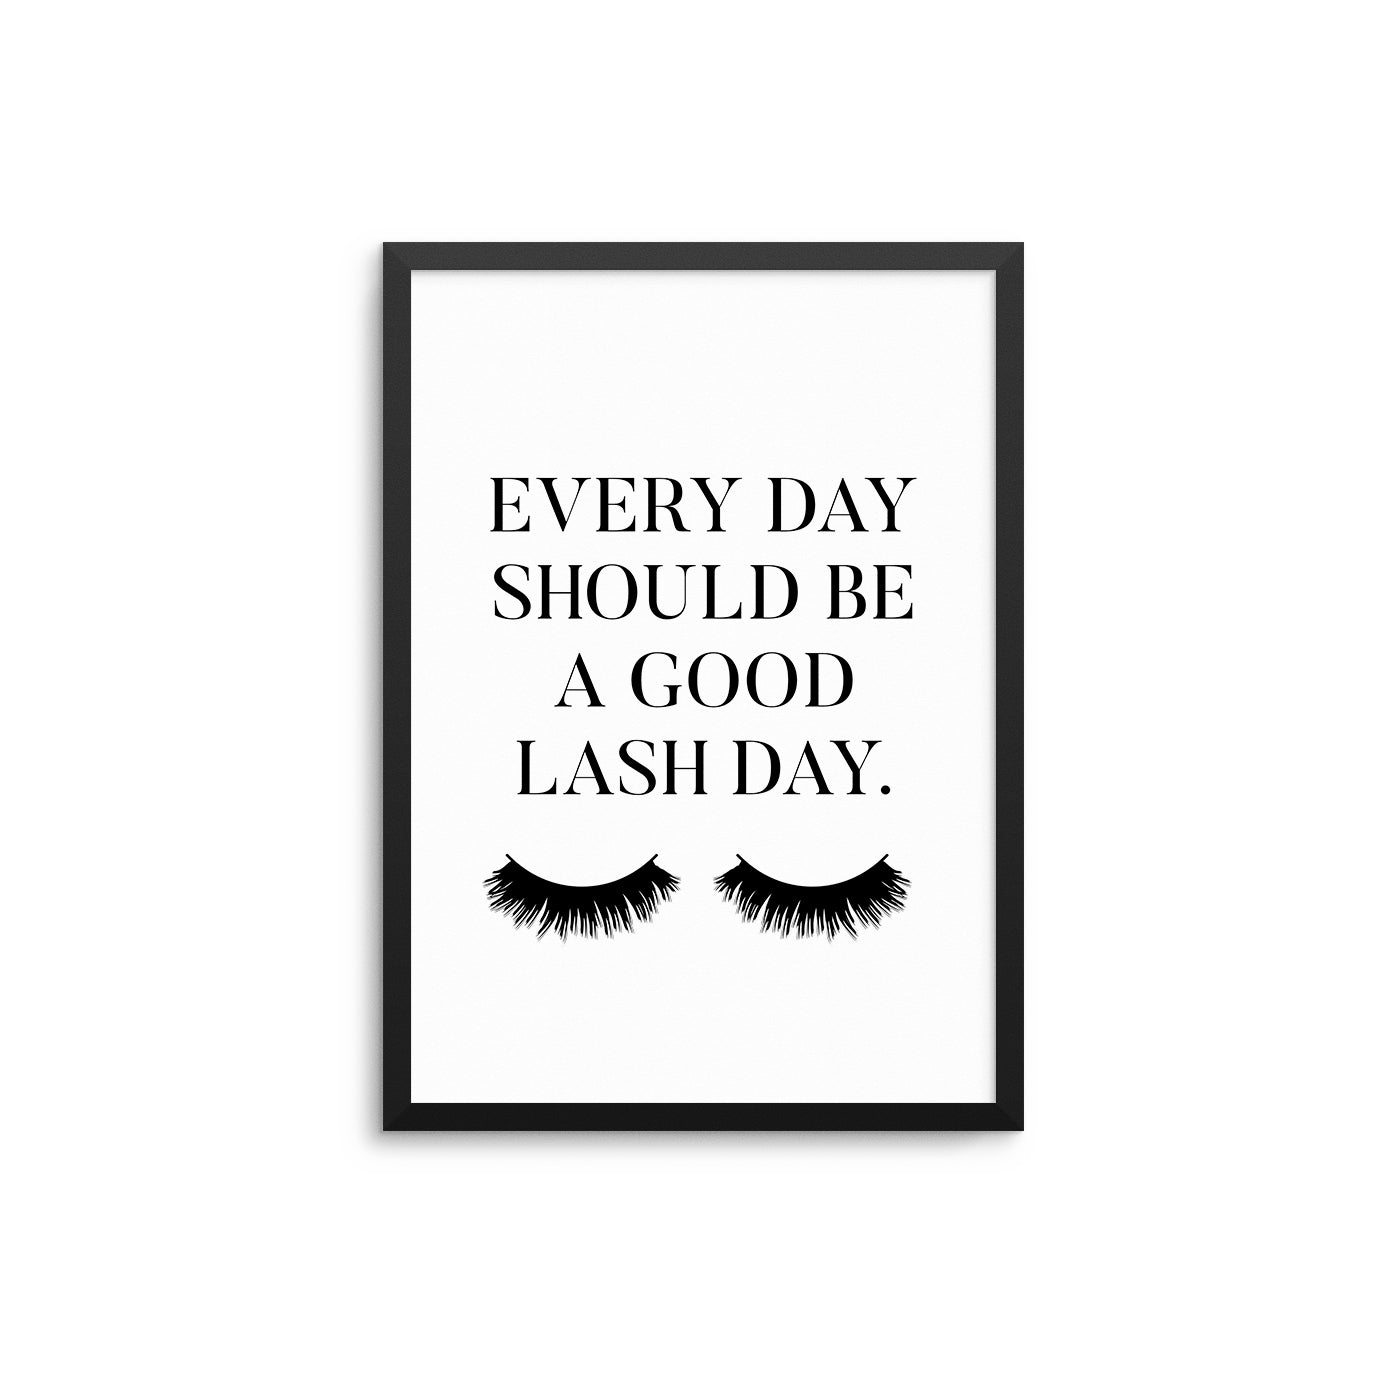 Every Day Should Be A Good Lash Day - D'Luxe Prints